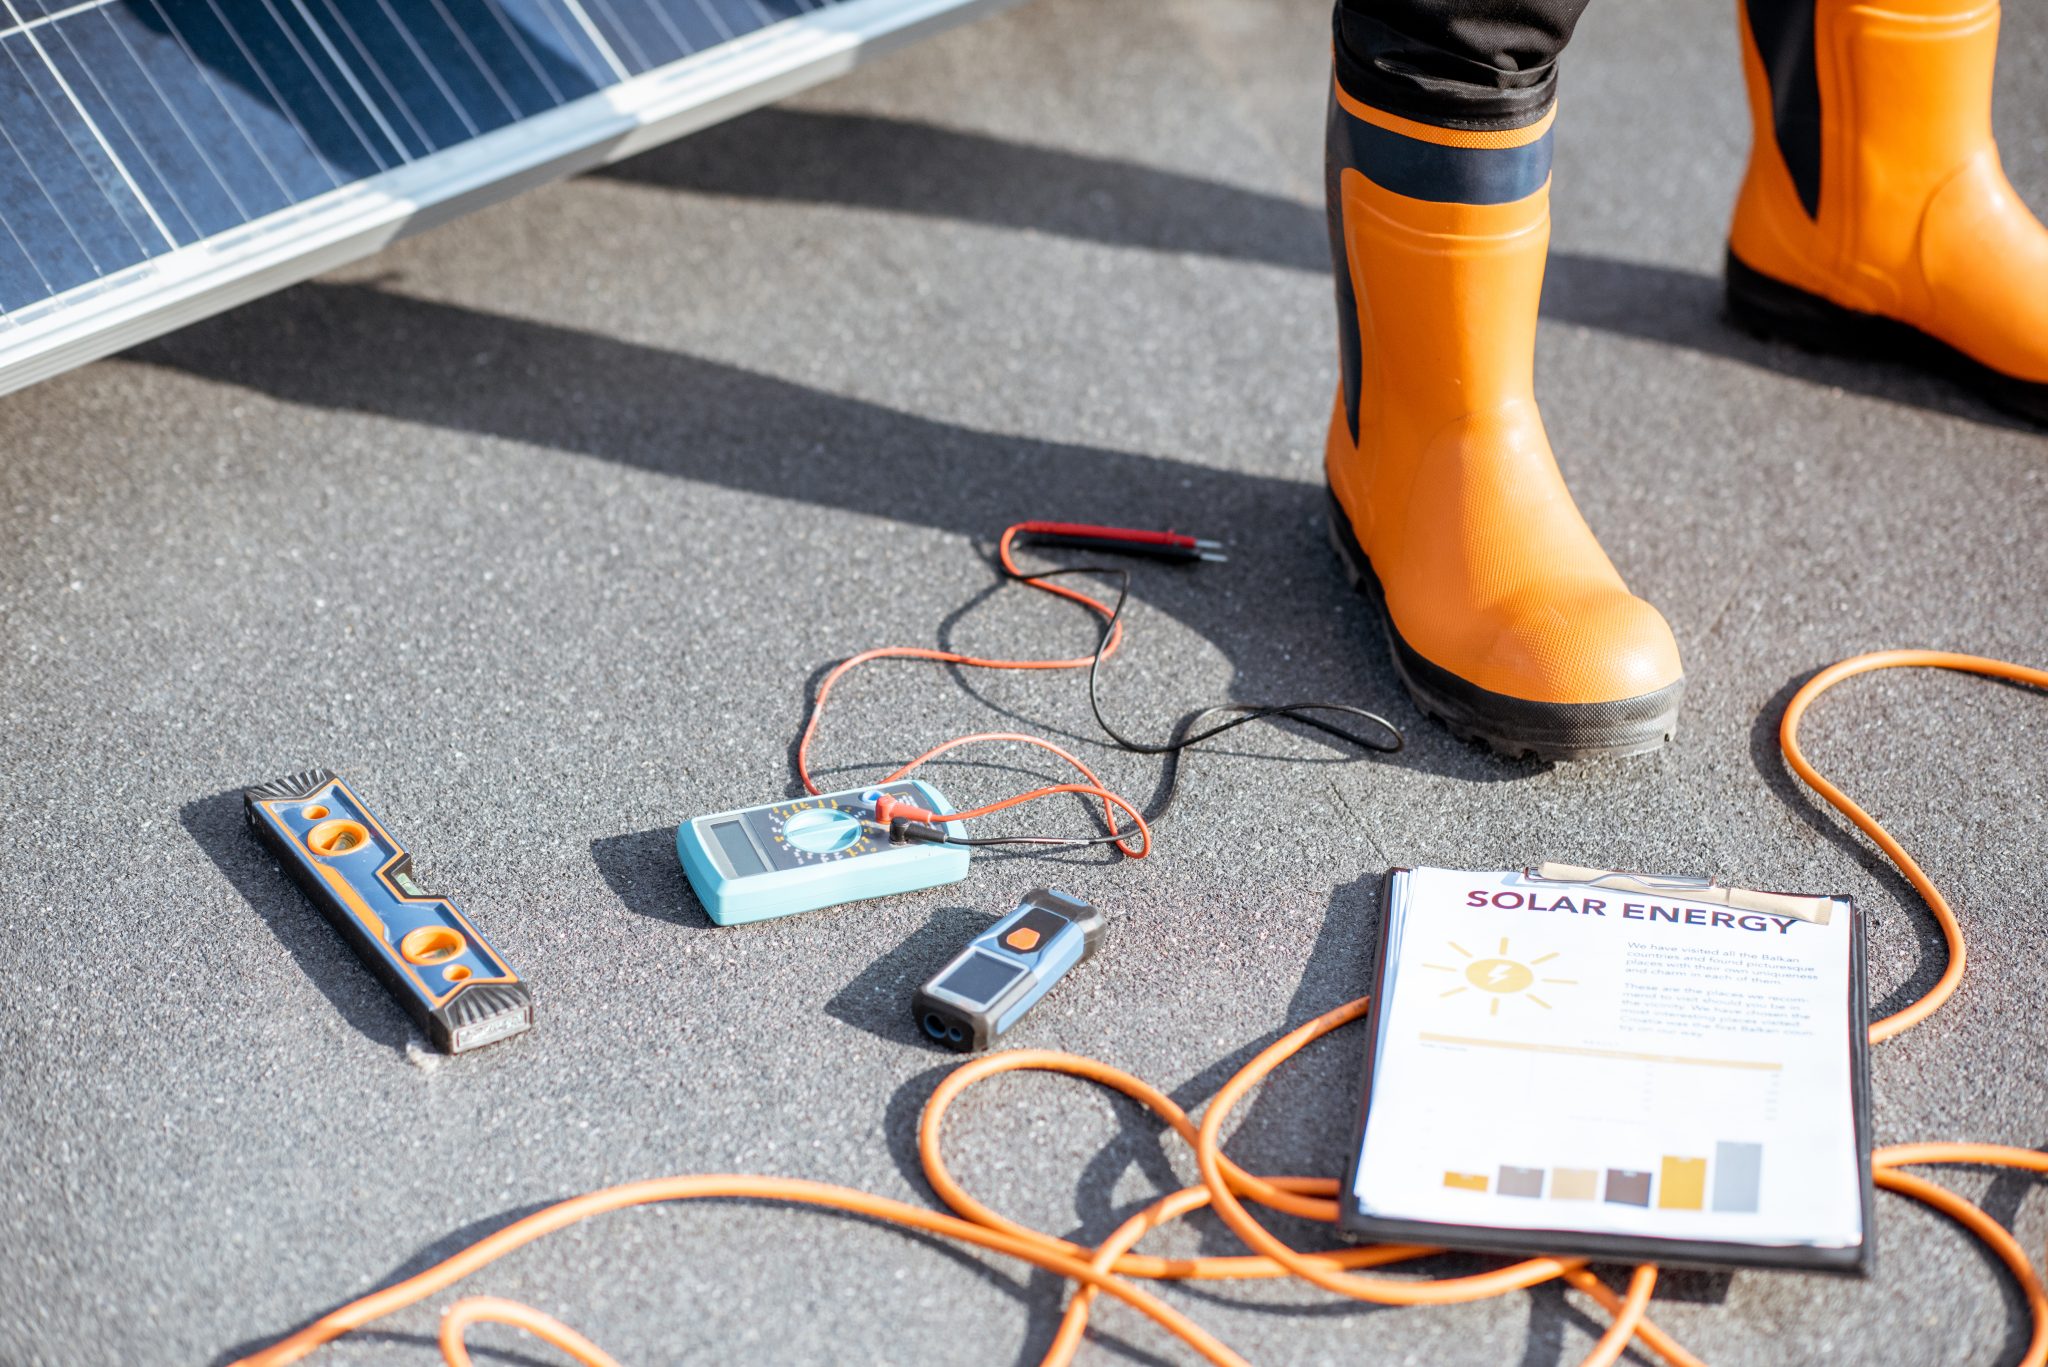 Installing solar panels, close-up on a working tools. wires and man in protective clothing standing on a rooftop with photovoltaic power station